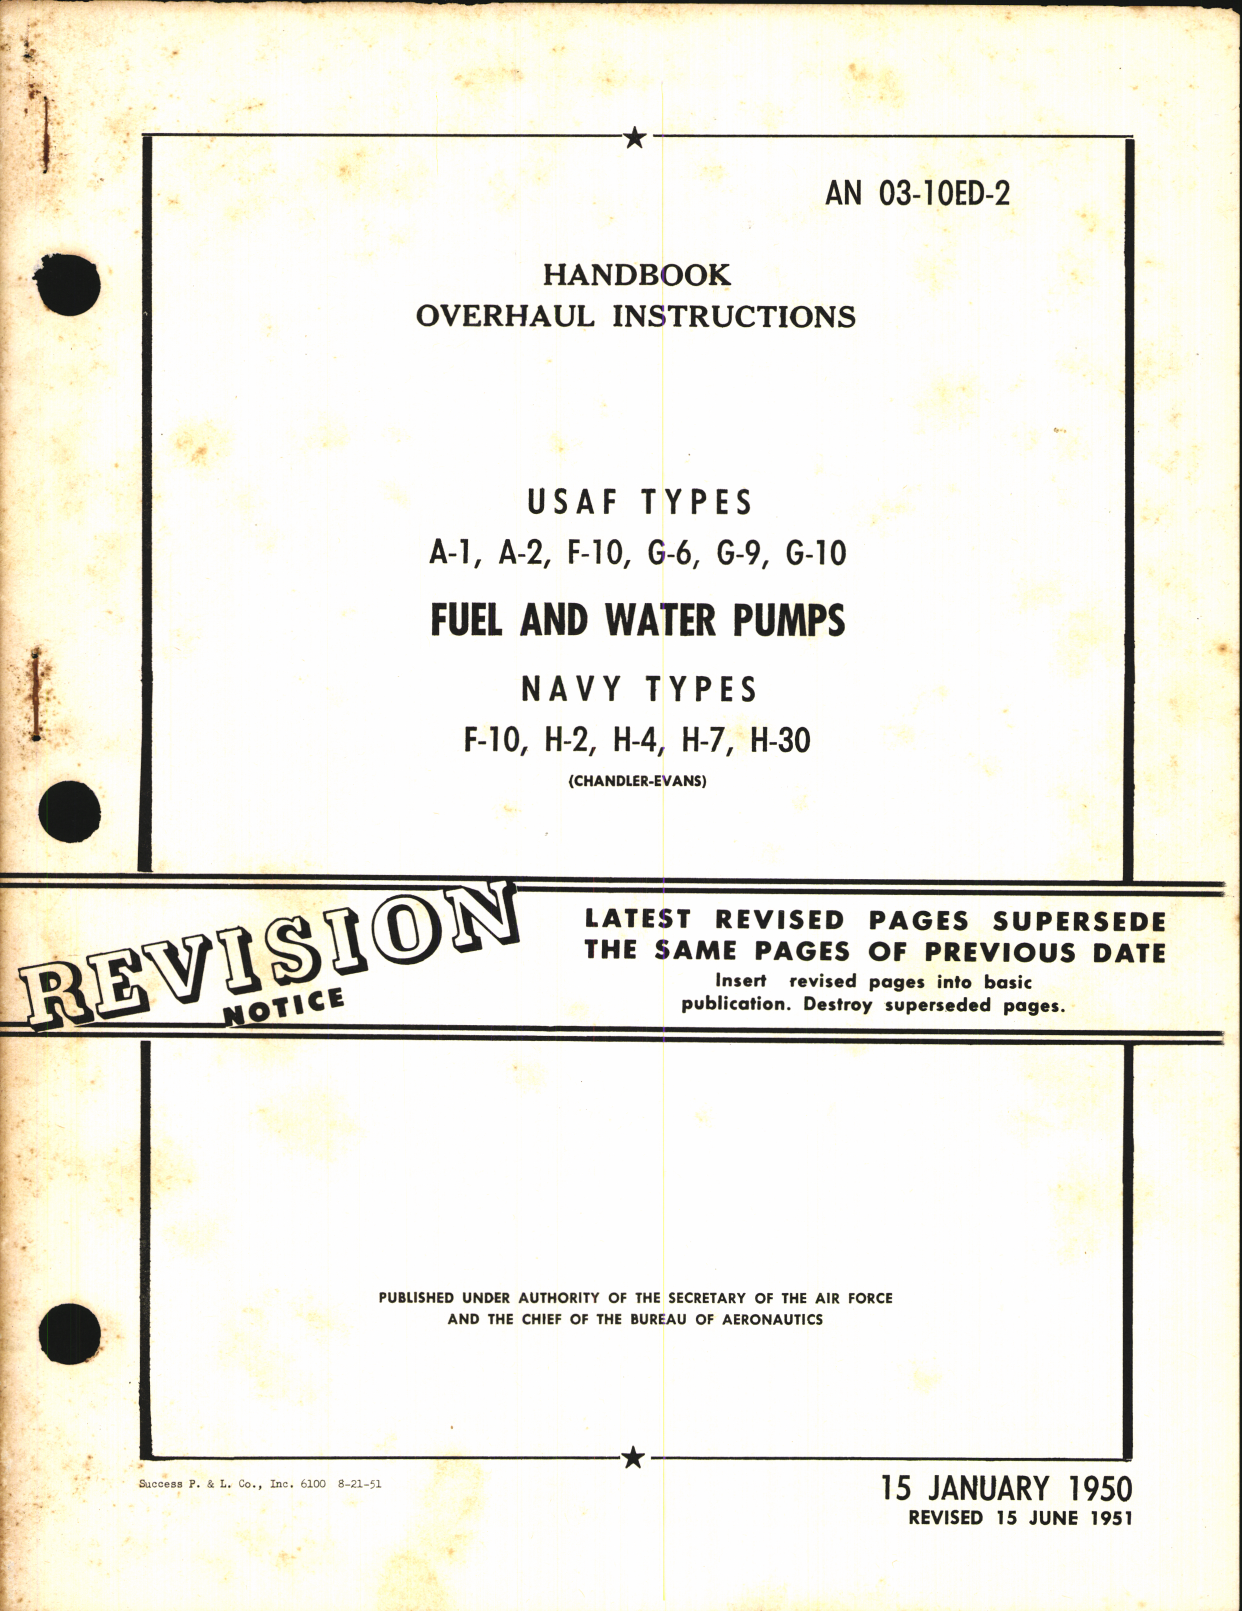 Sample page 1 from AirCorps Library document: Overhaul Instructions for Fuel and Water Pumps